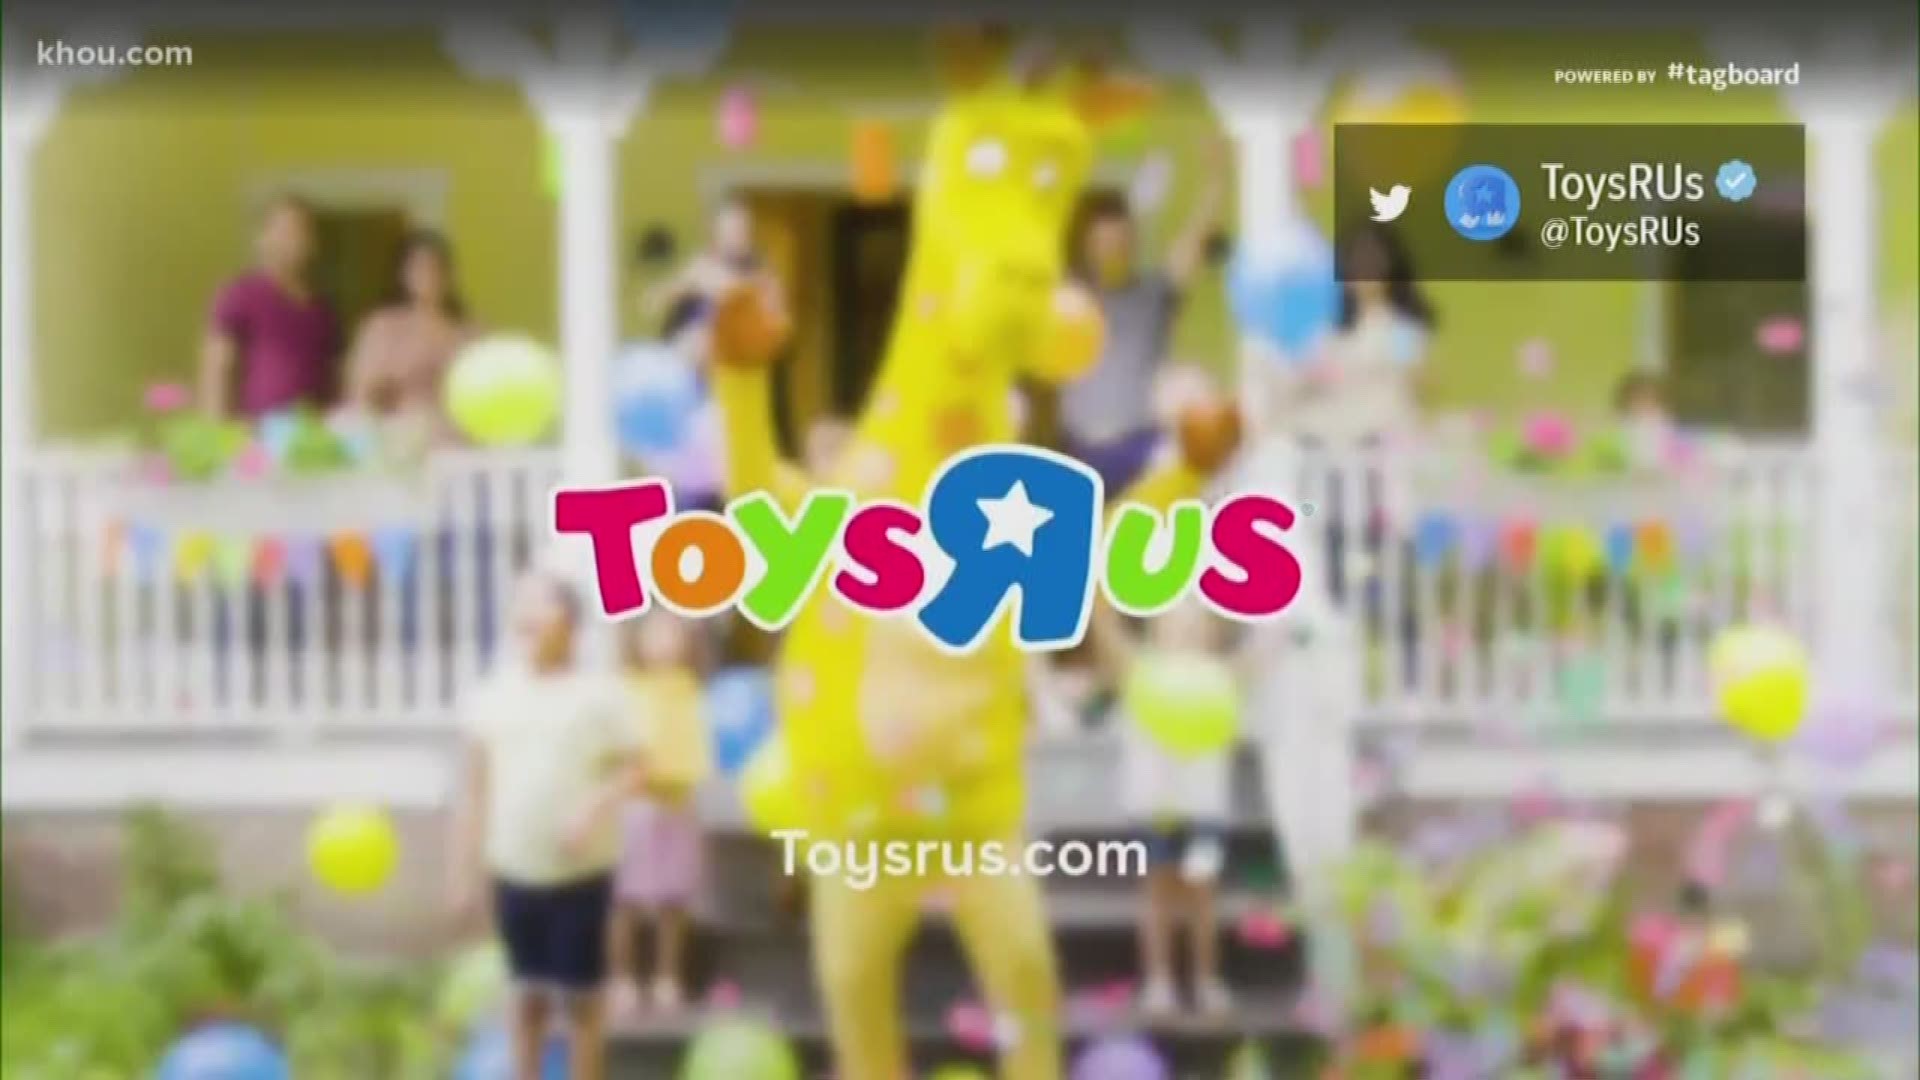 Toys 'R' Us opens new store in Galleria - ABC13 Houston